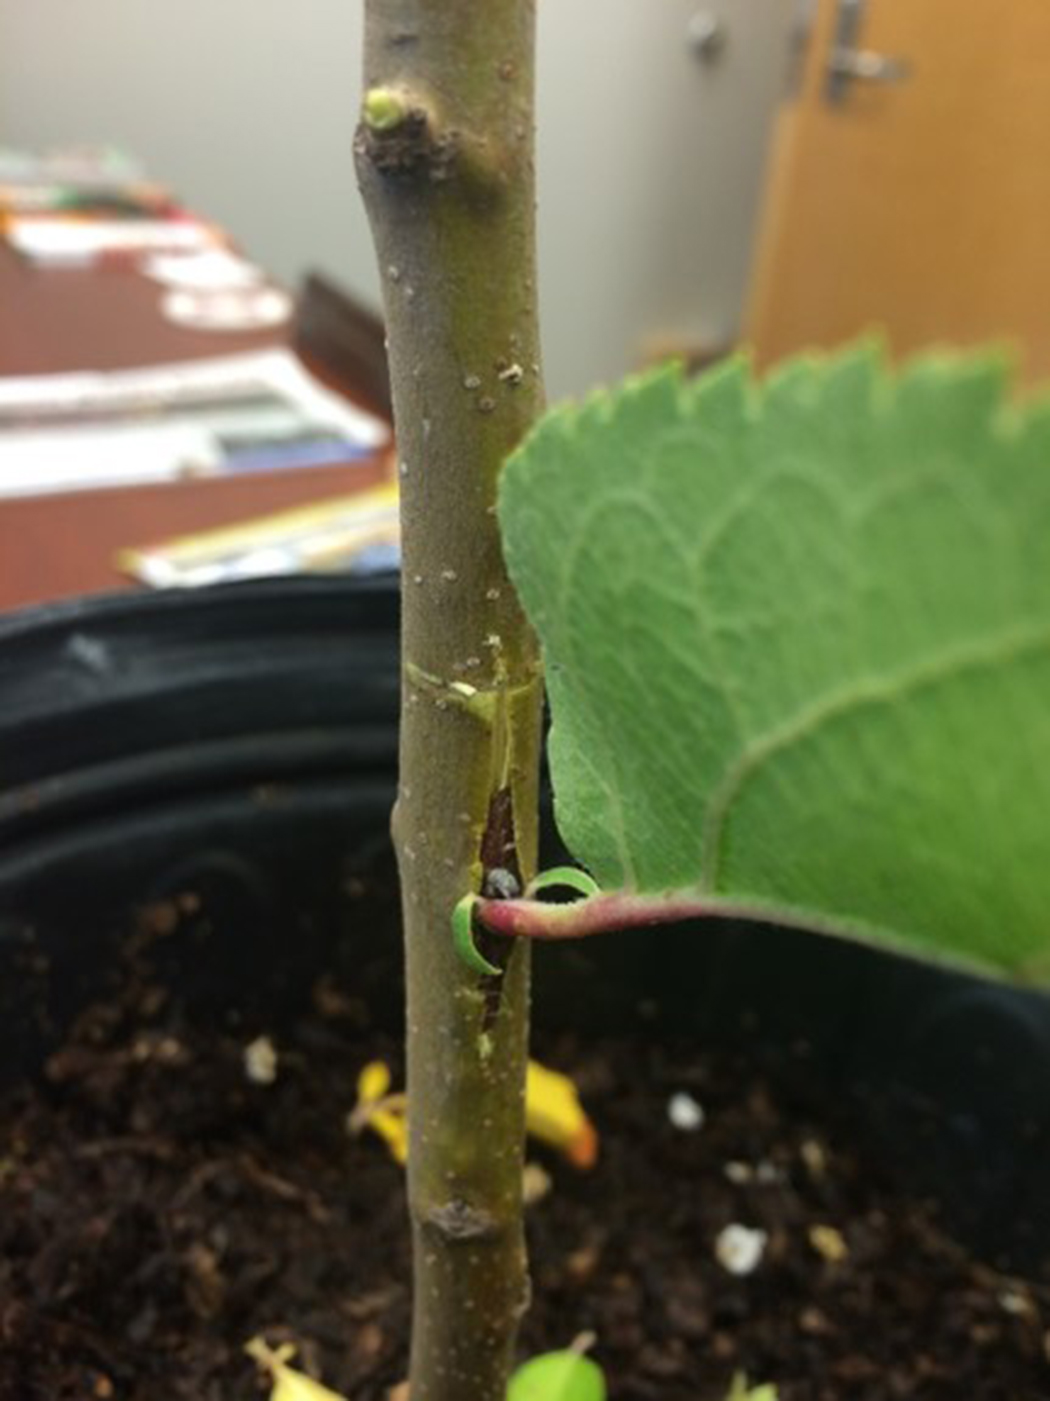 The potted plant's trunk with a stem inserted into the T cut. The new stem has a leaf.